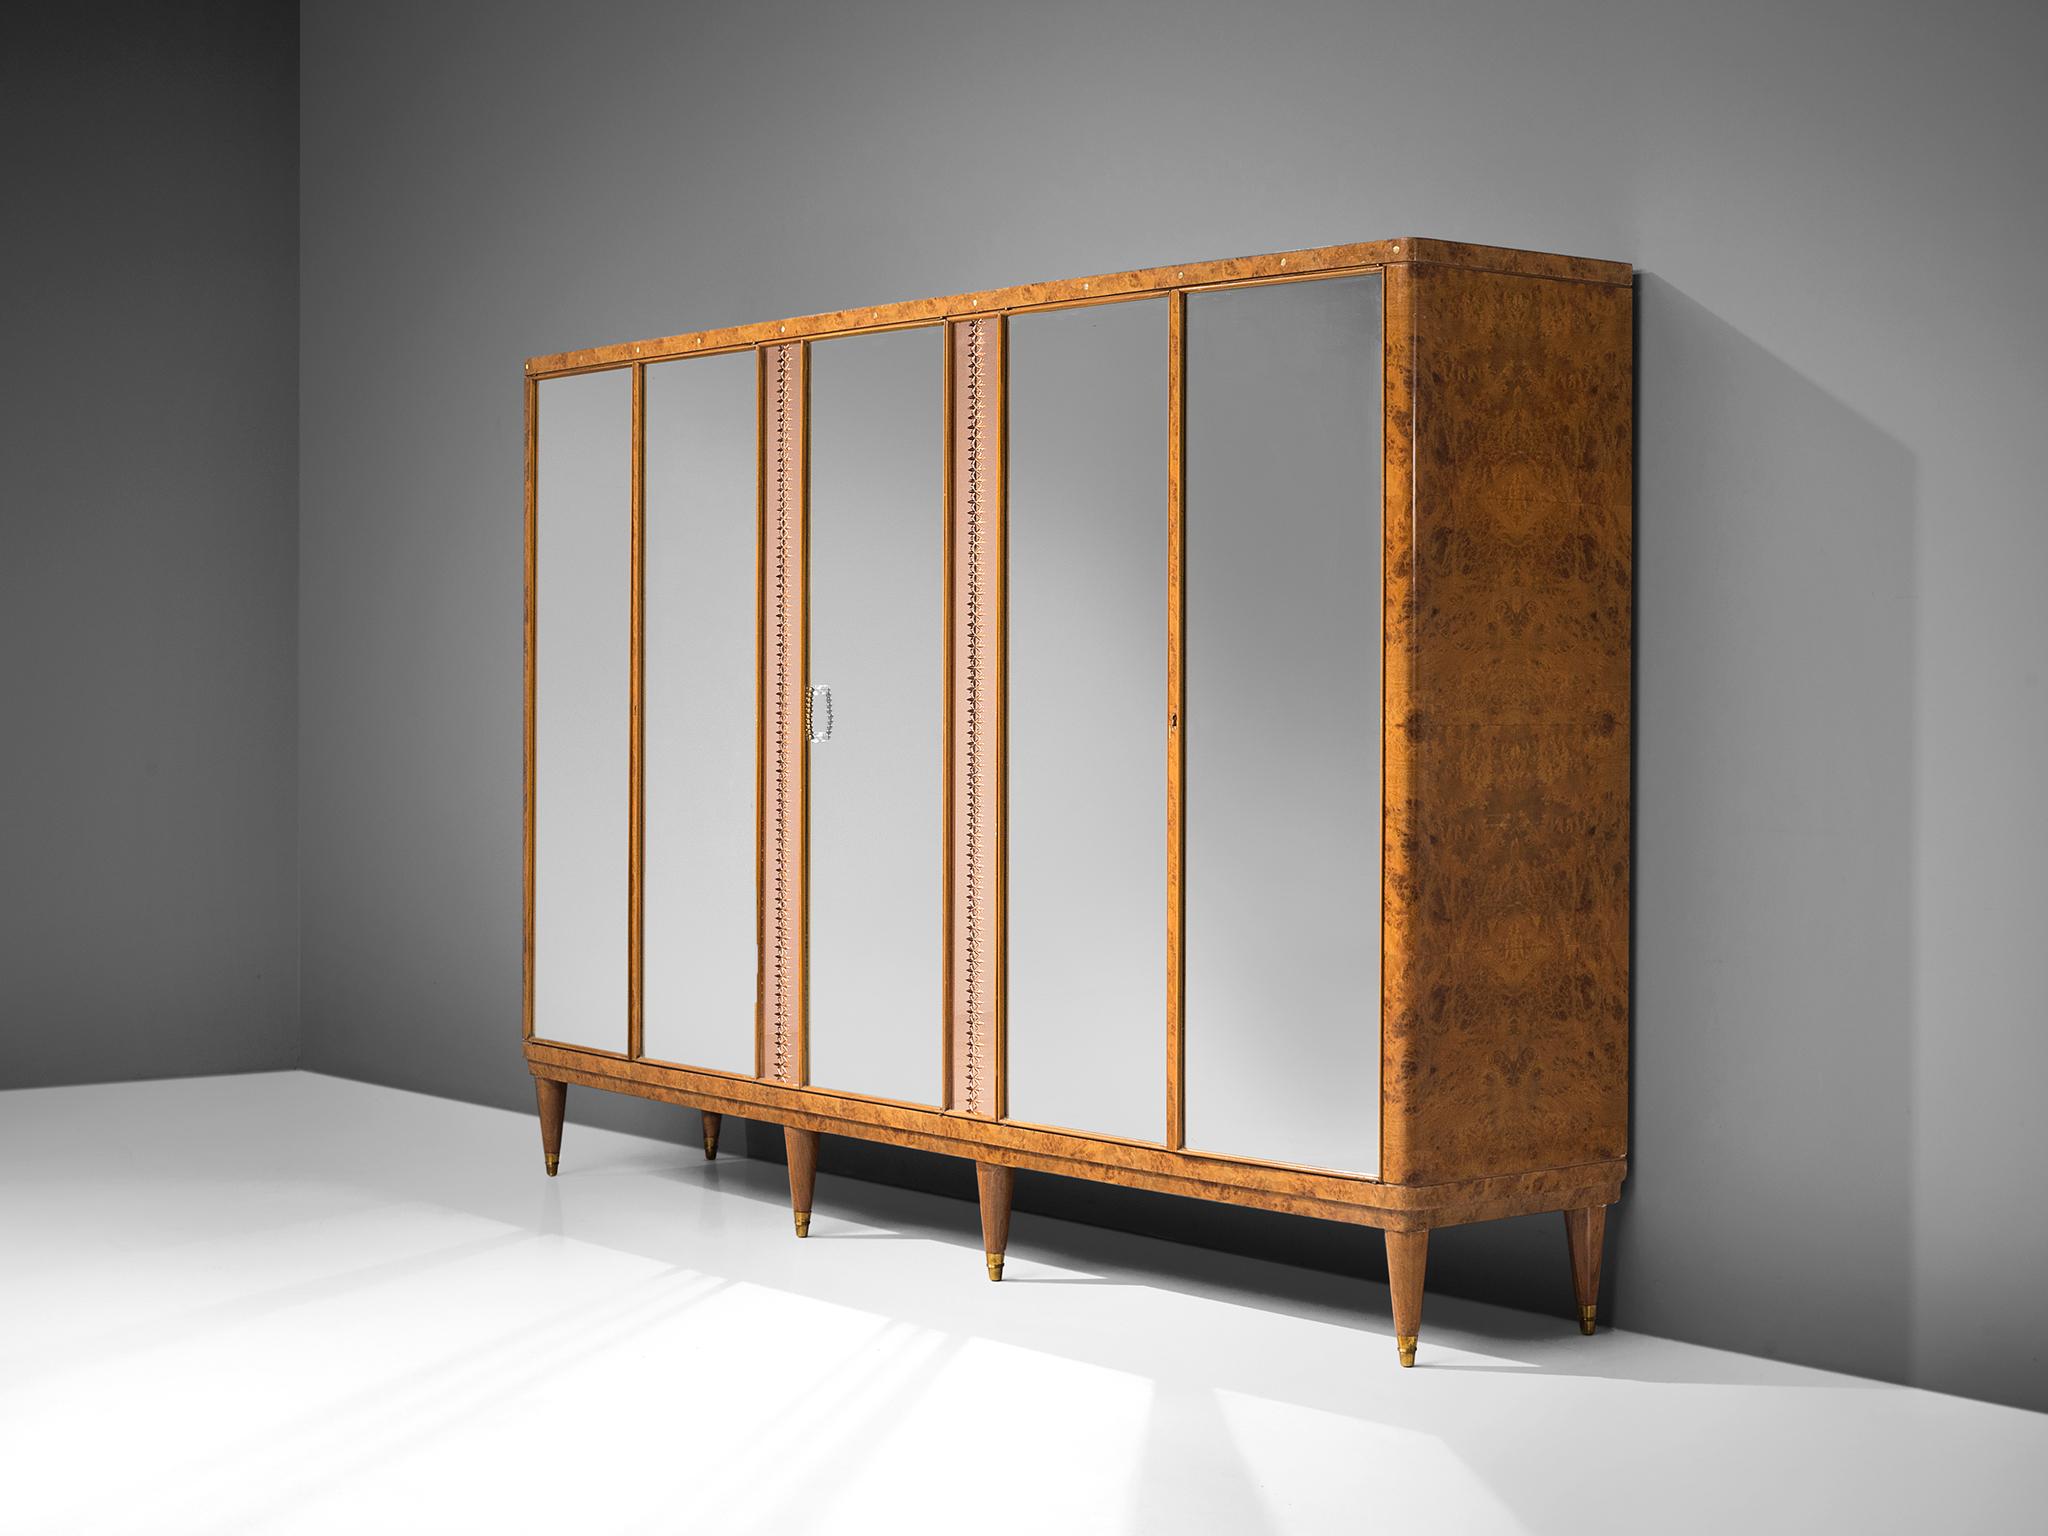 Cabinet, walnut burl, wood, glass, brass, Italy, 1940s.

This grand cabinet is executed in walnut burl, brass and pink glass rims. The cabinet features five mirrors behind which three sections are displayed. Surrounding the middle mirror there is